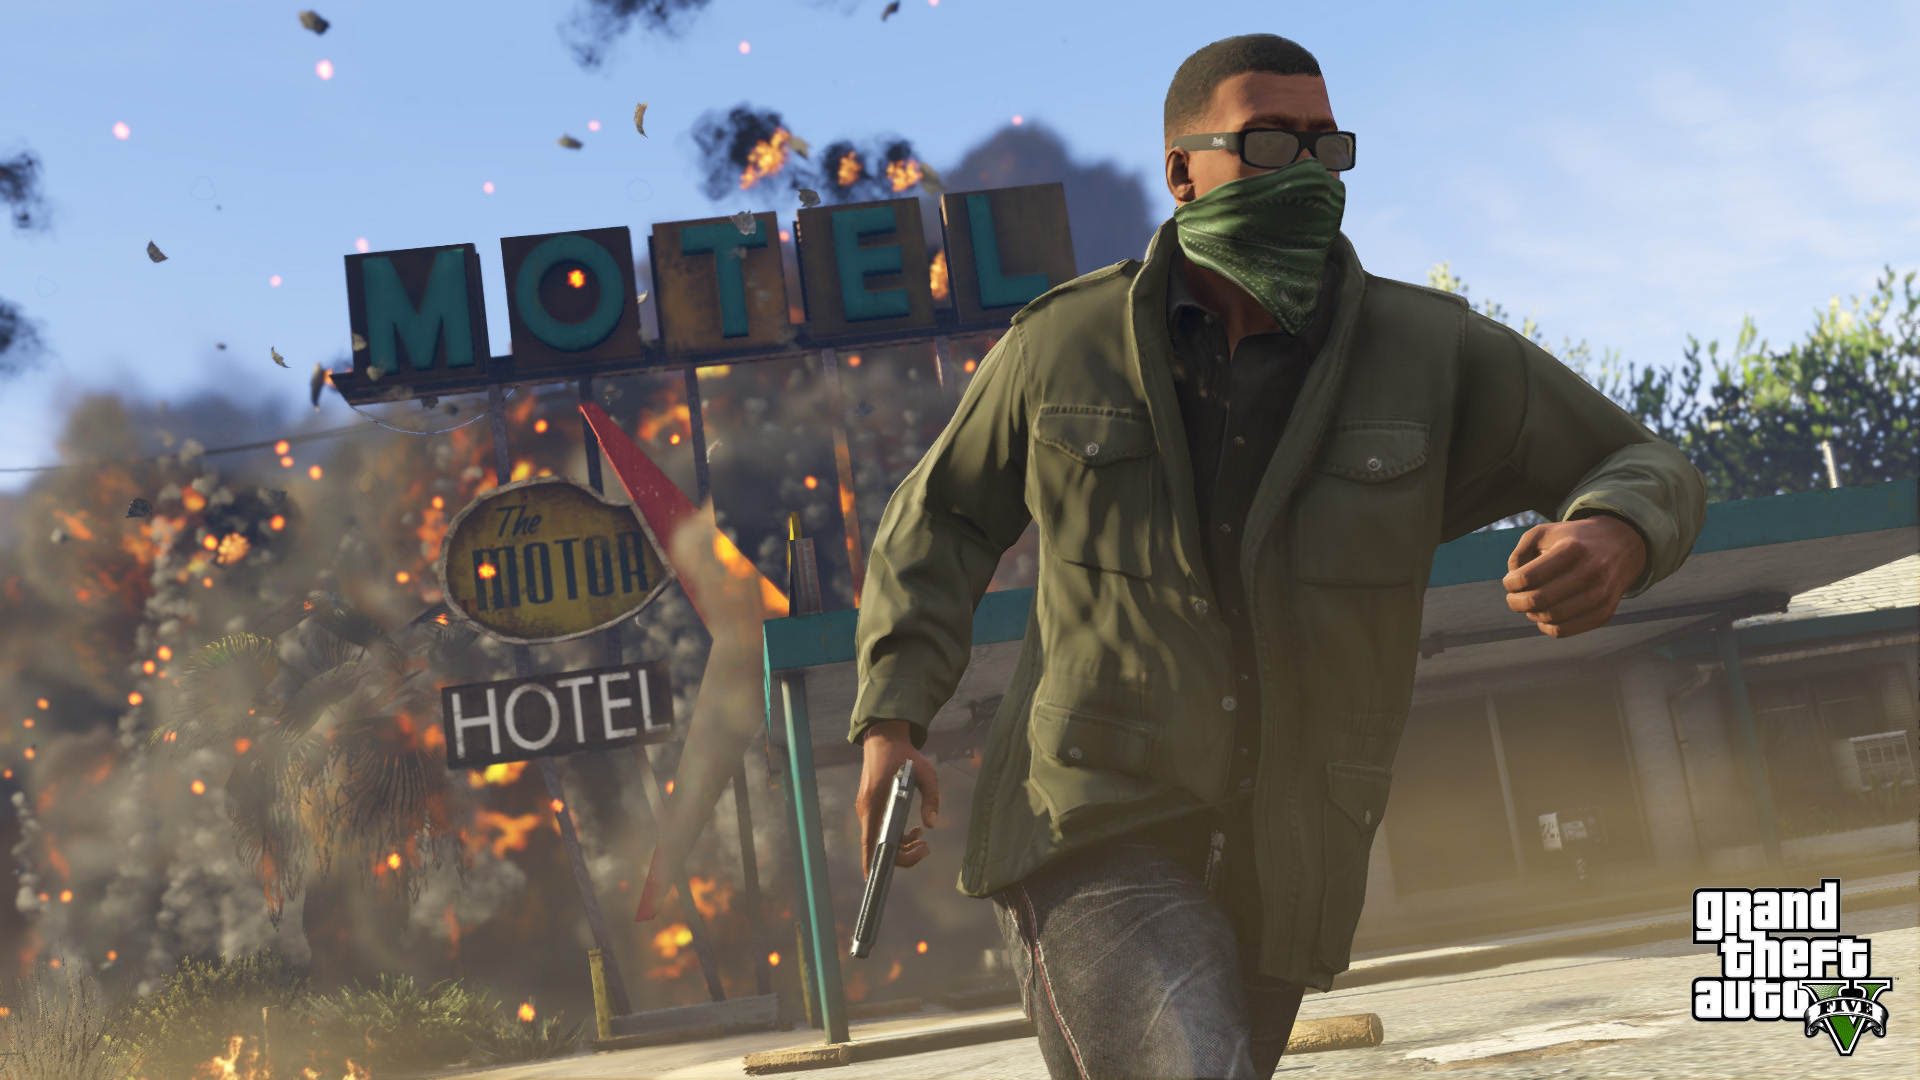 Will the GTA games be televised in 2015?